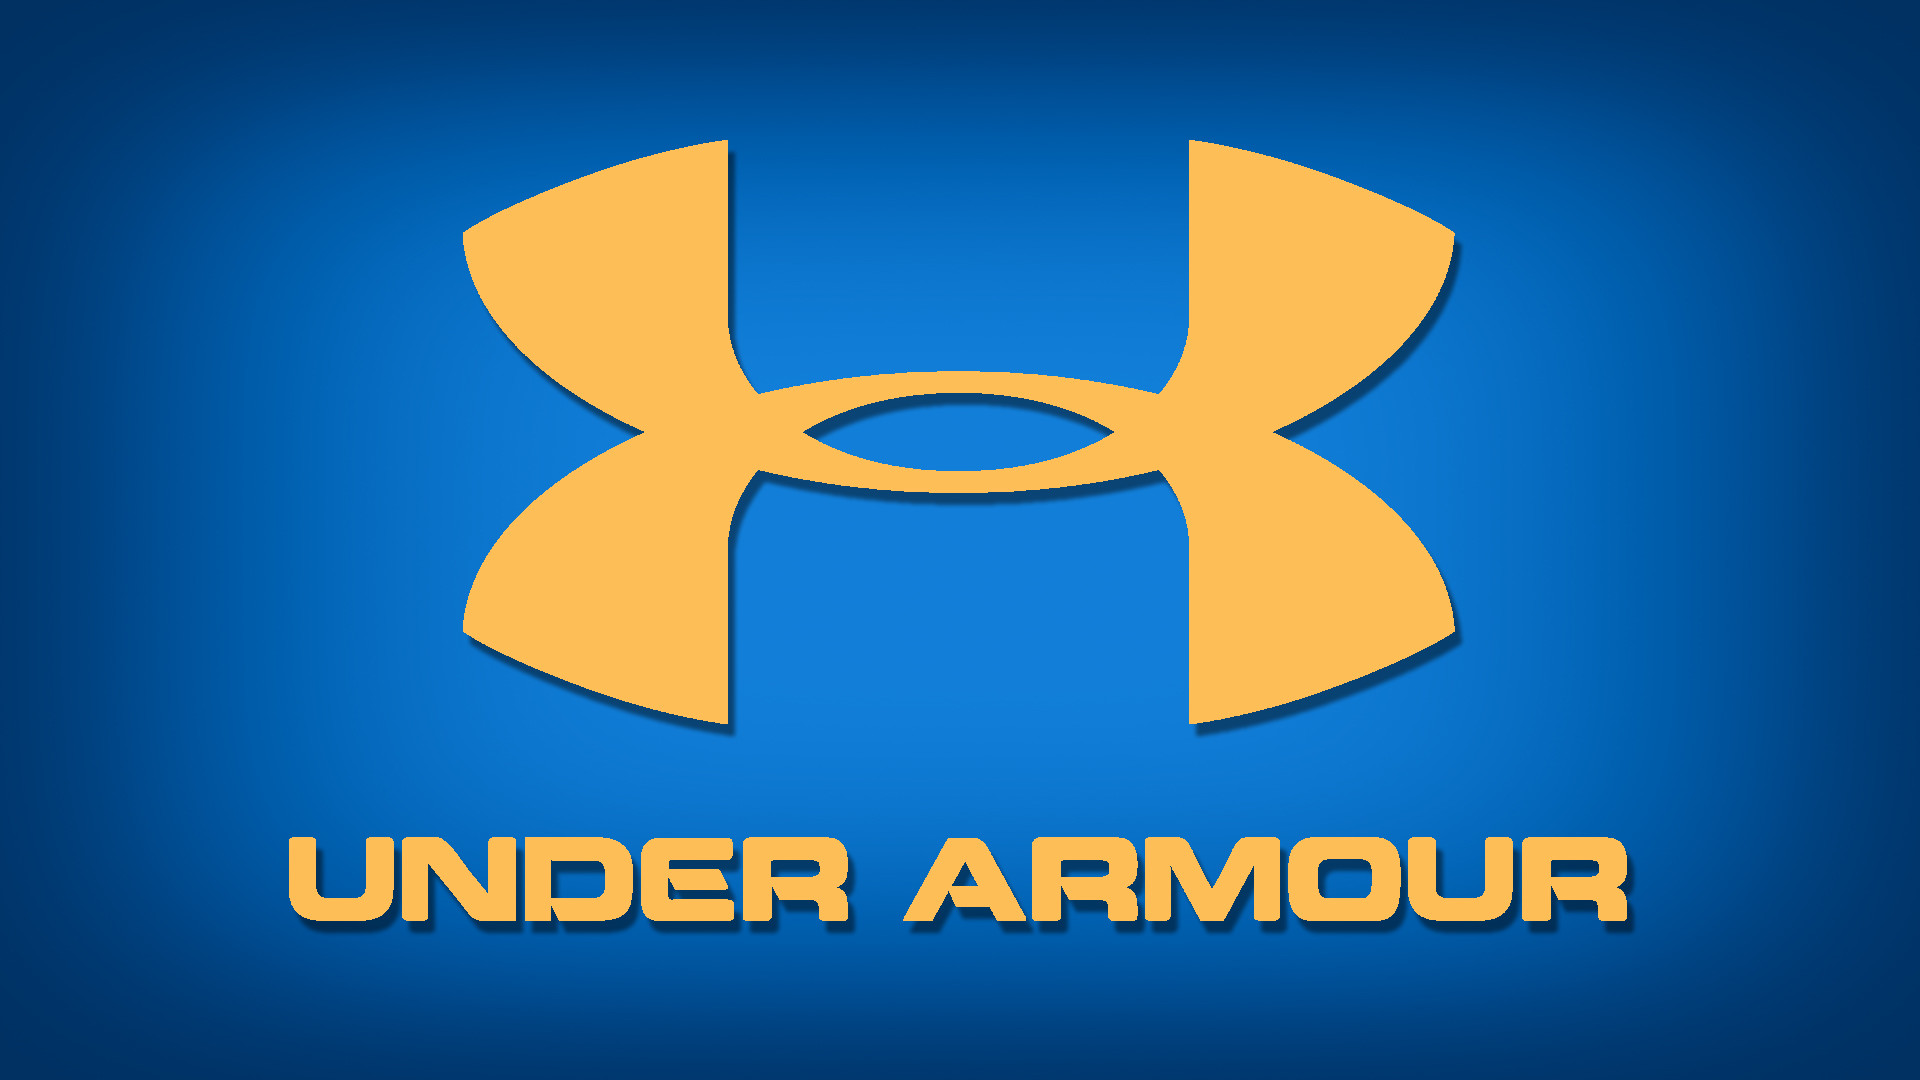 Under Armour Wallpaper 2018 (67+ images)